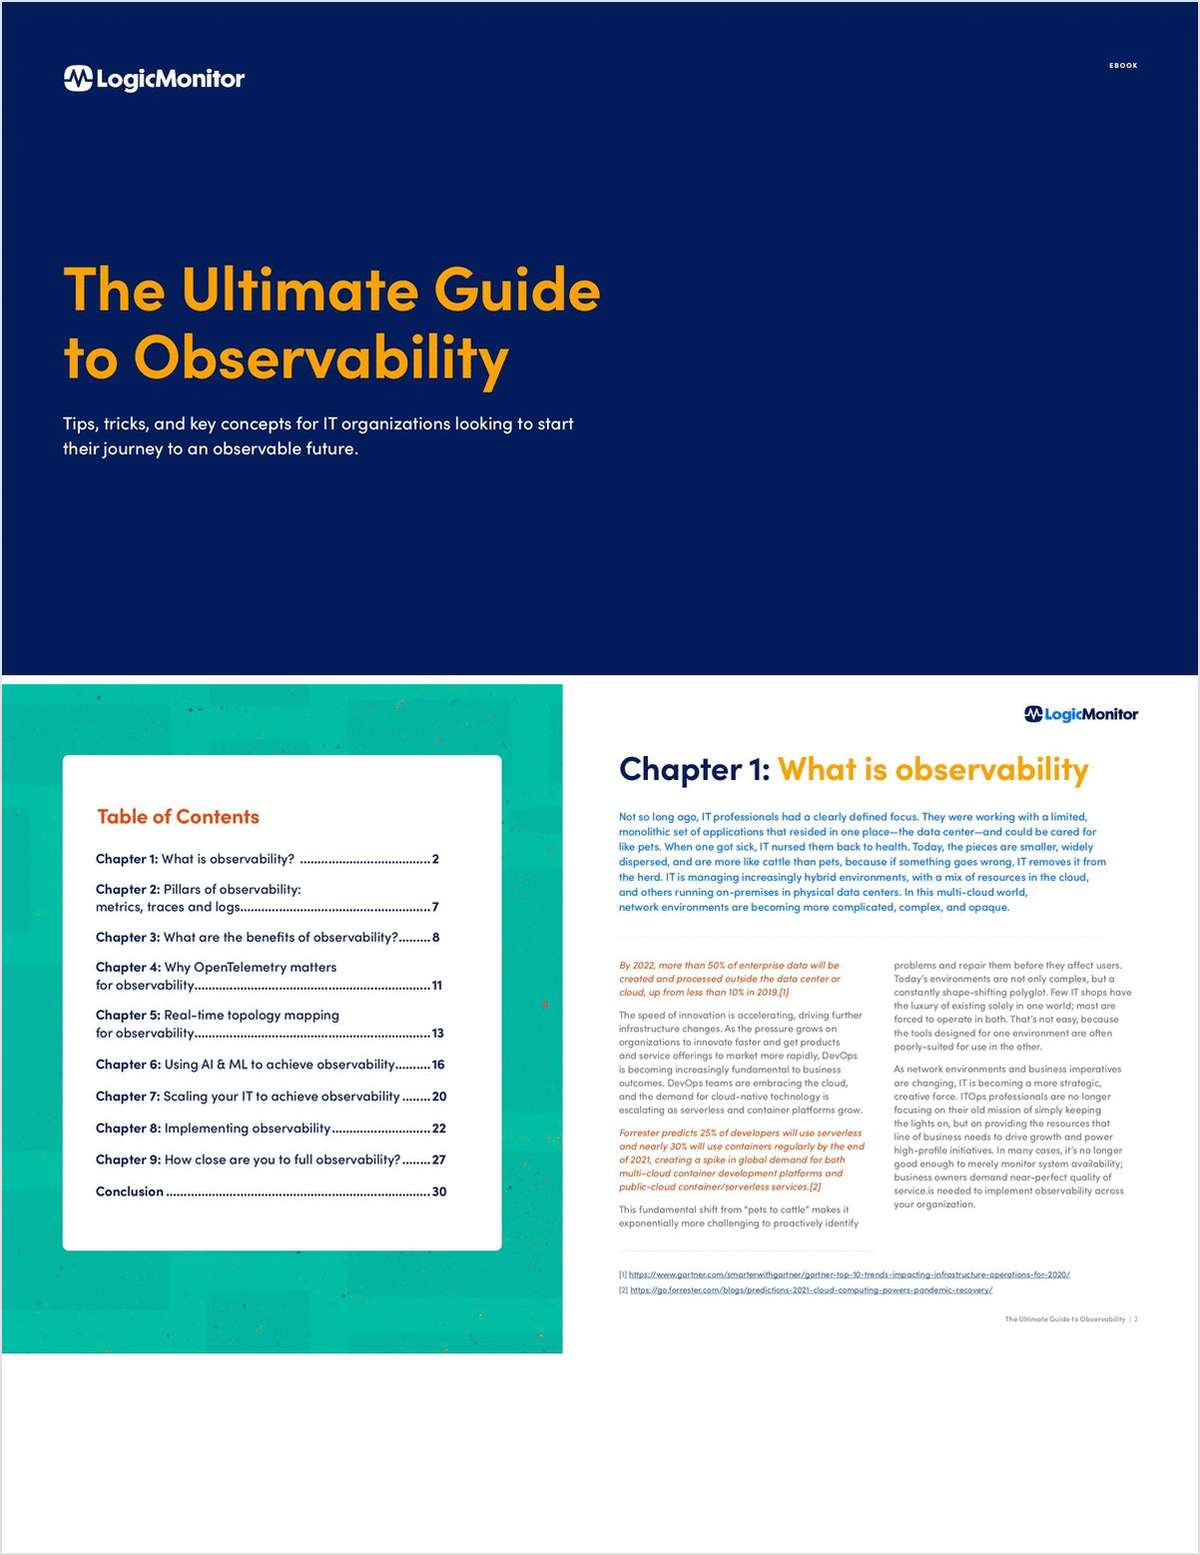 The Ultimate Guide to Observability